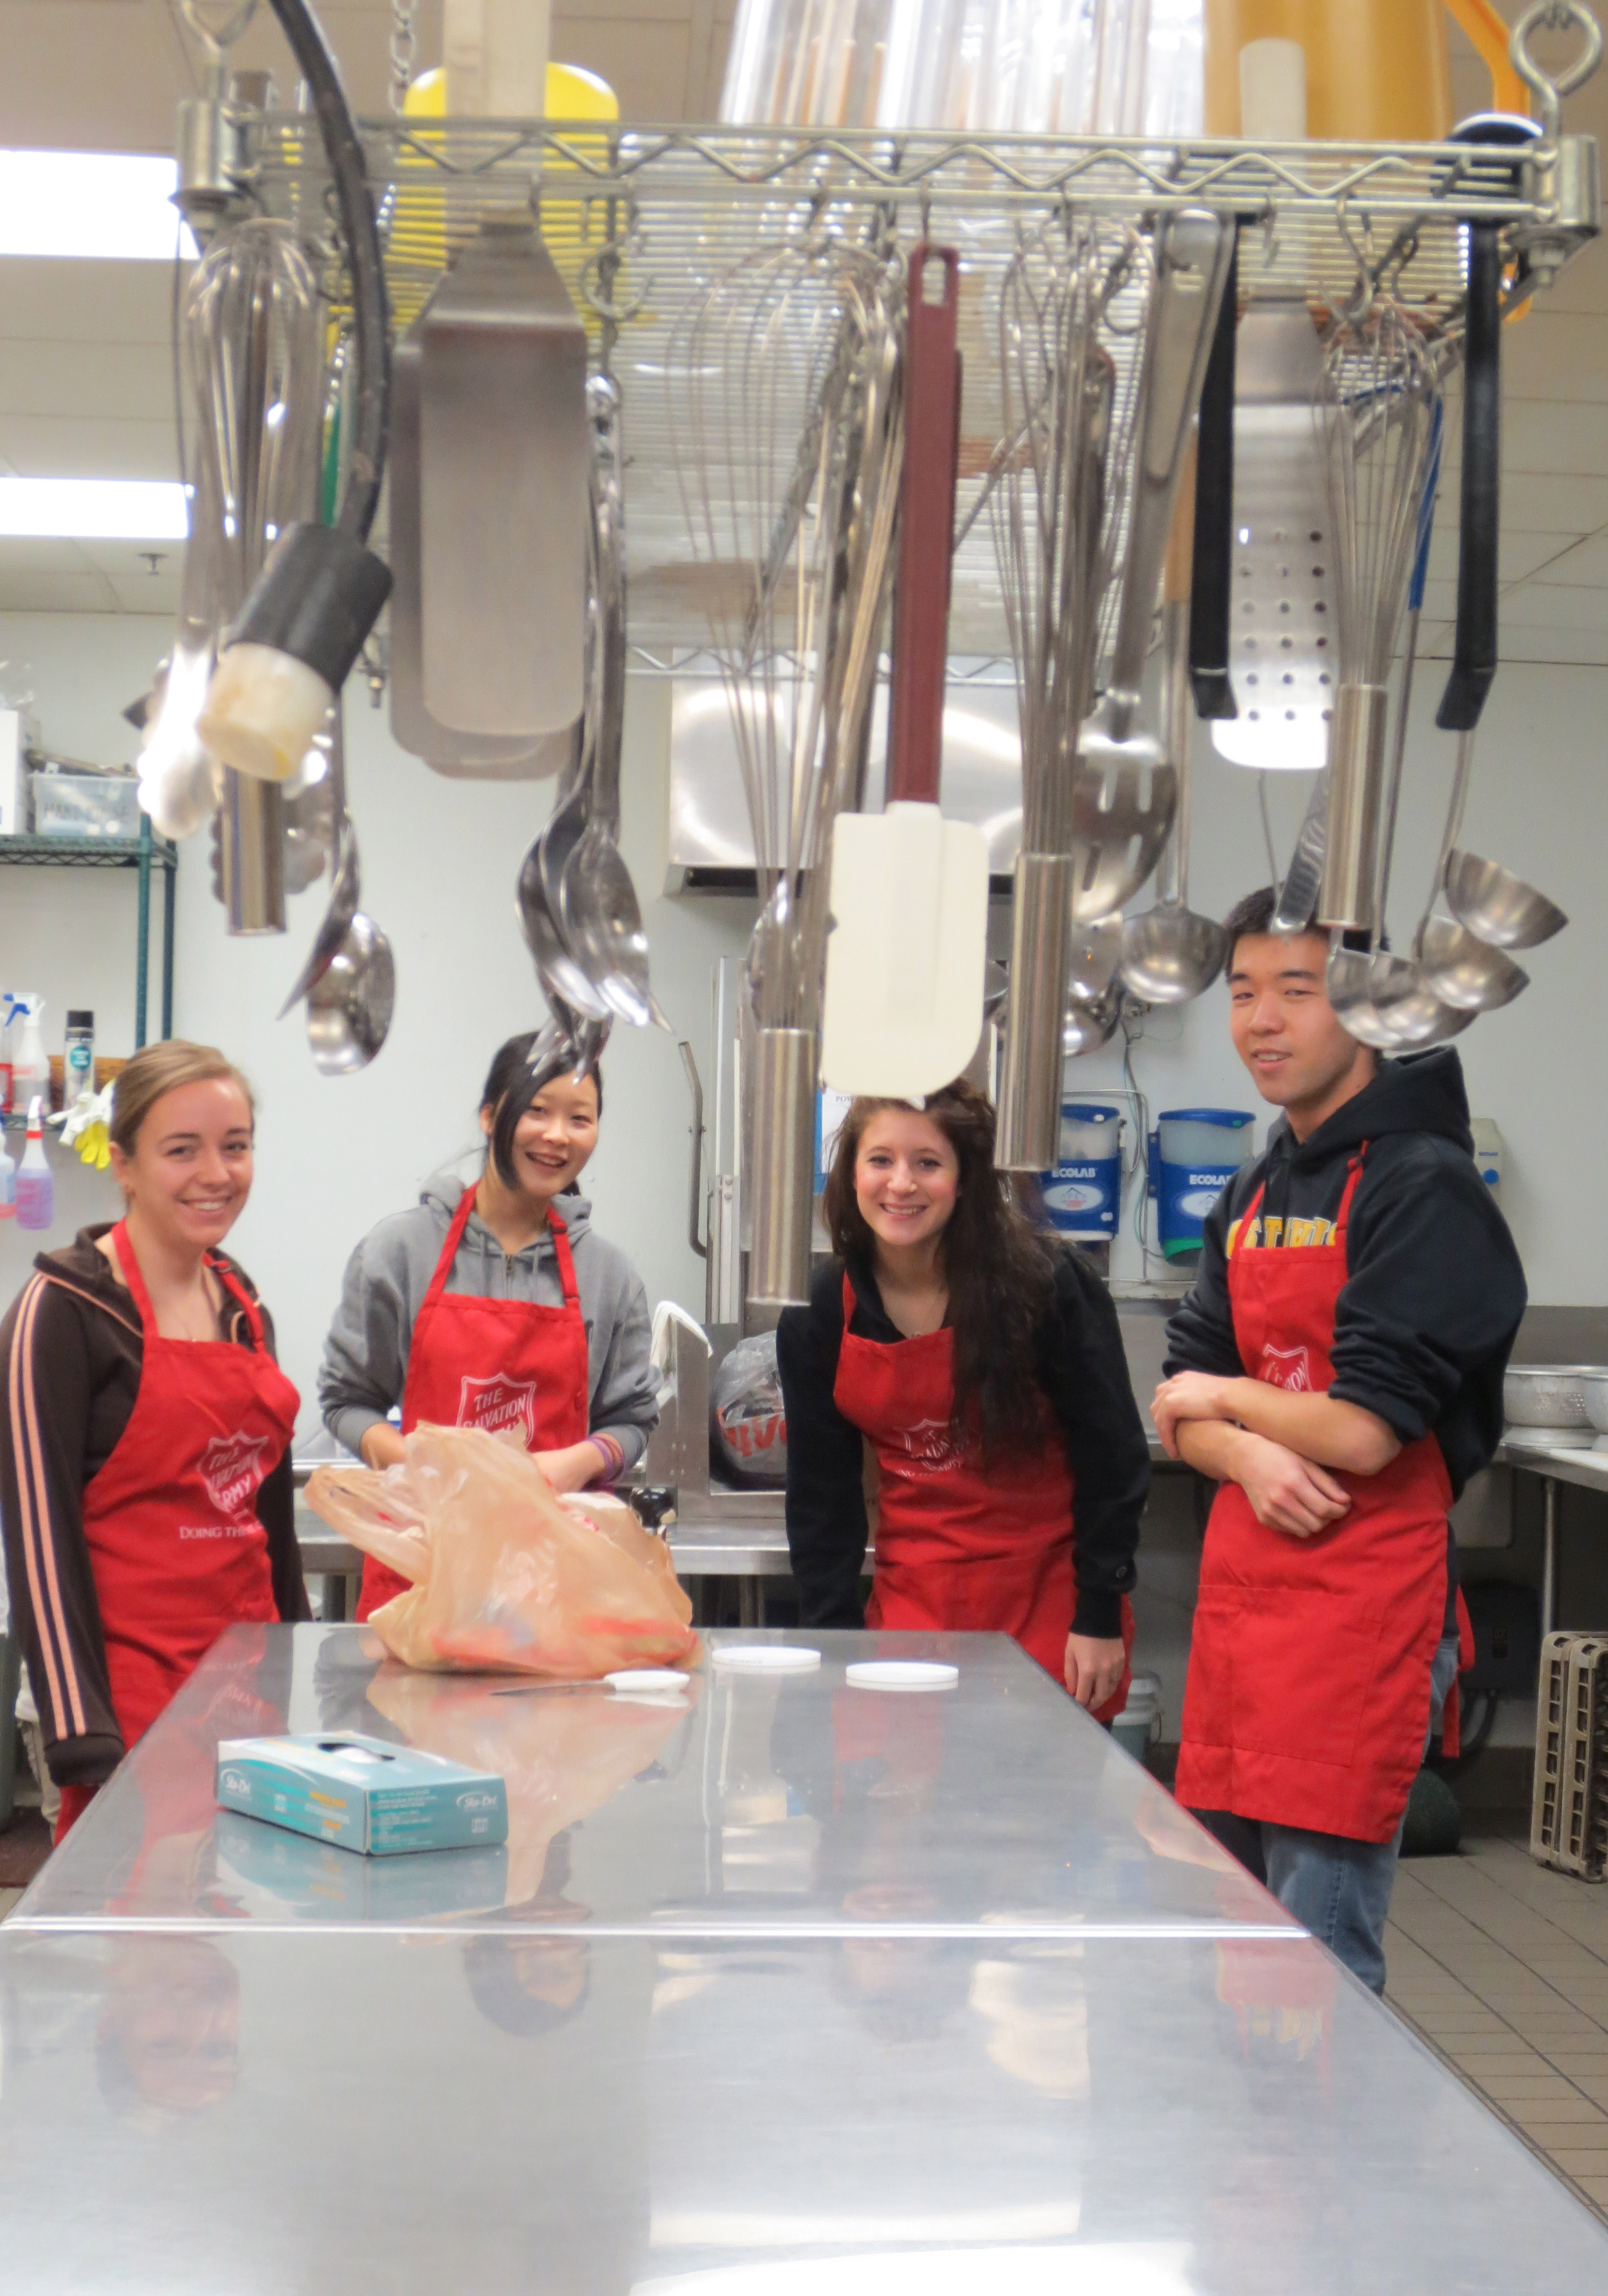 Members of Thia Cooper's January Term class volunteering at the Salvation Army men's homeless shelter in Mankato. From left to right: Sarah Spande '15, Mari Tabata '16, Taylor Robertson '16, and Kyle Bright '15.